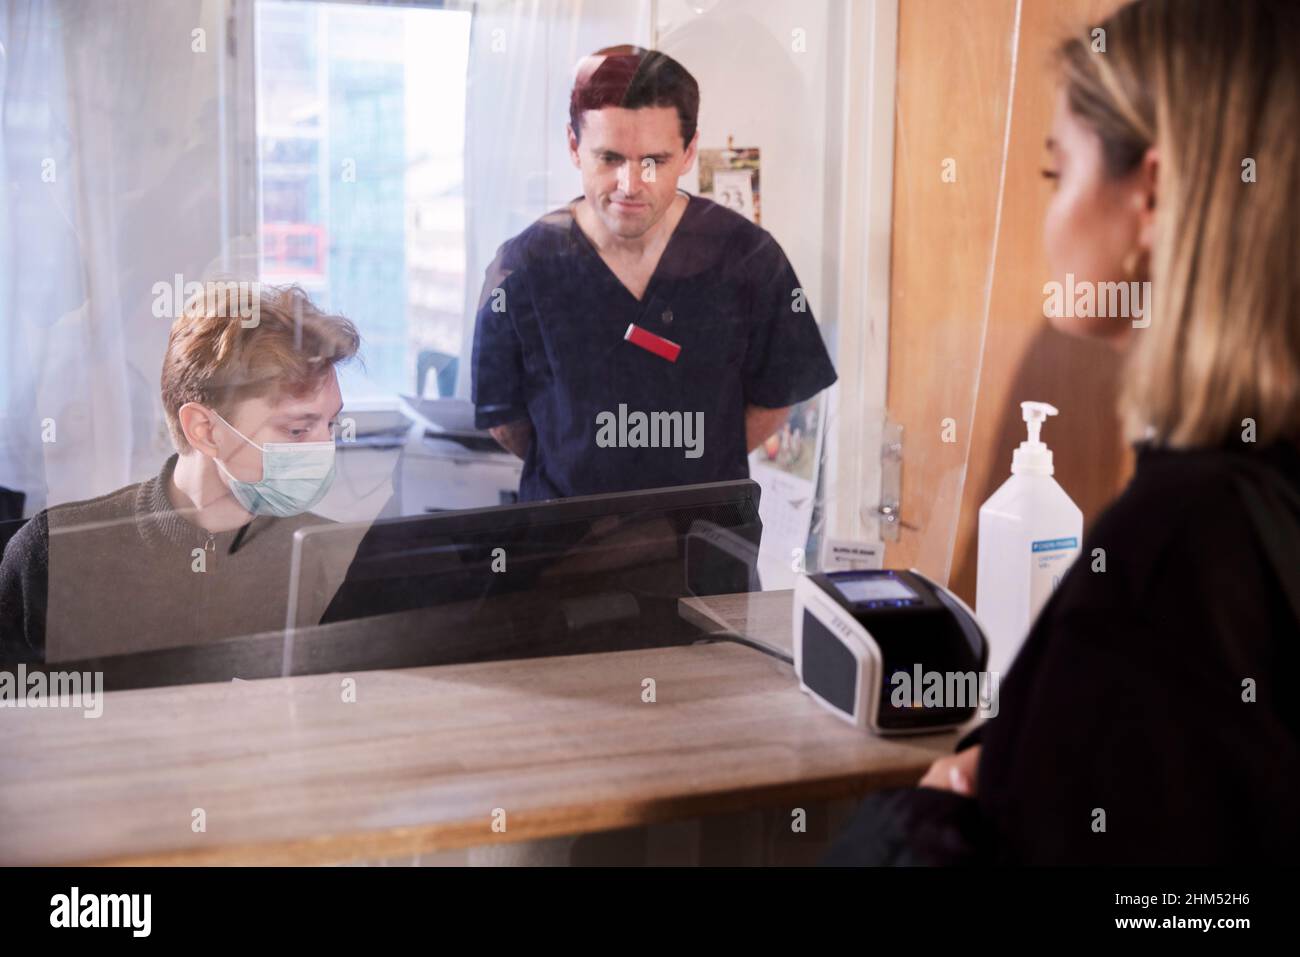 Patient and doctor at reception desk Stock Photo